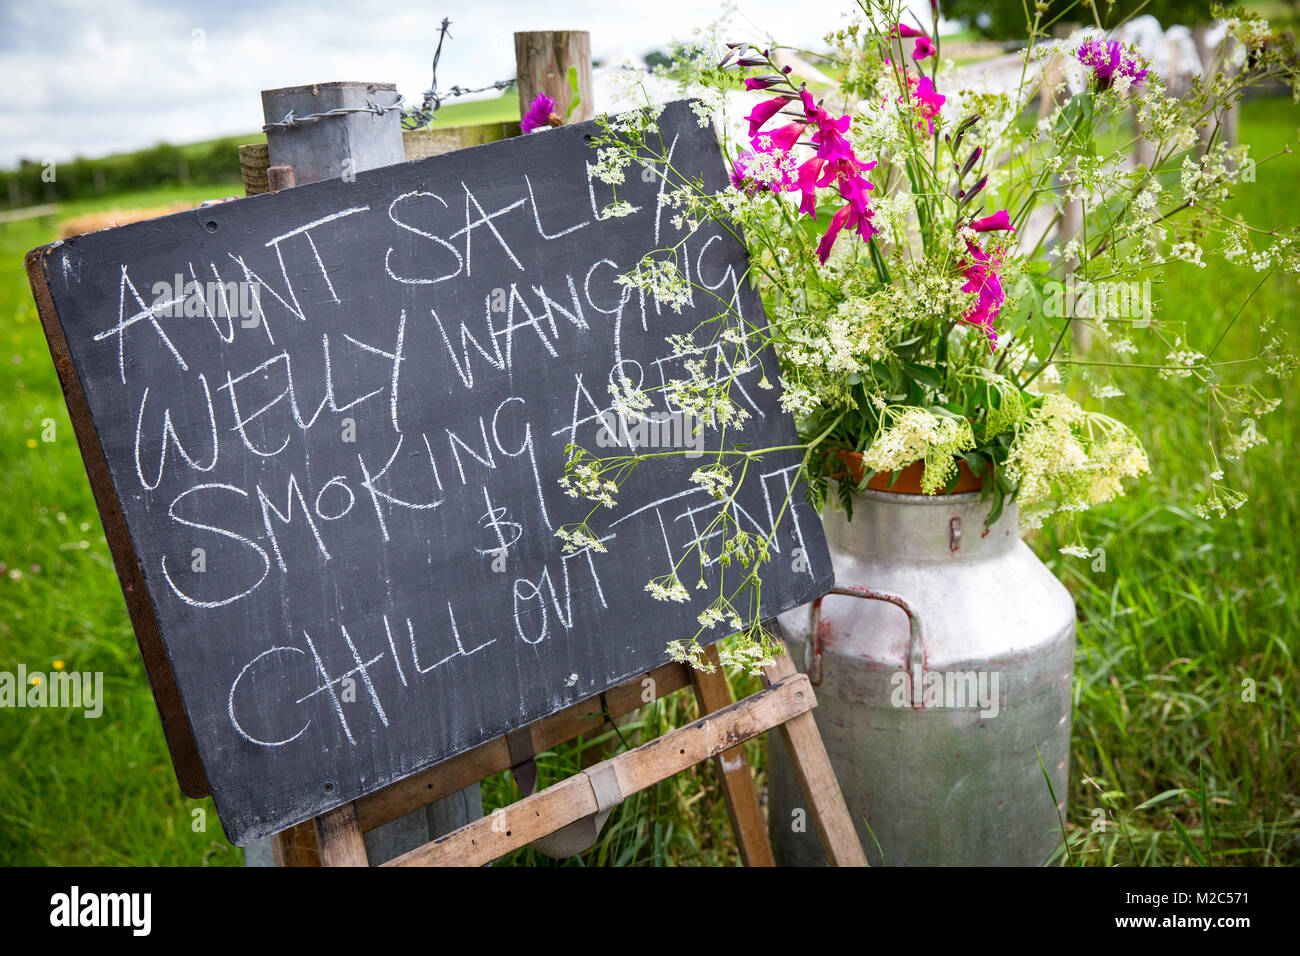 Chalkboard sign with milk churn filled with flowers, close-up Stock Photo